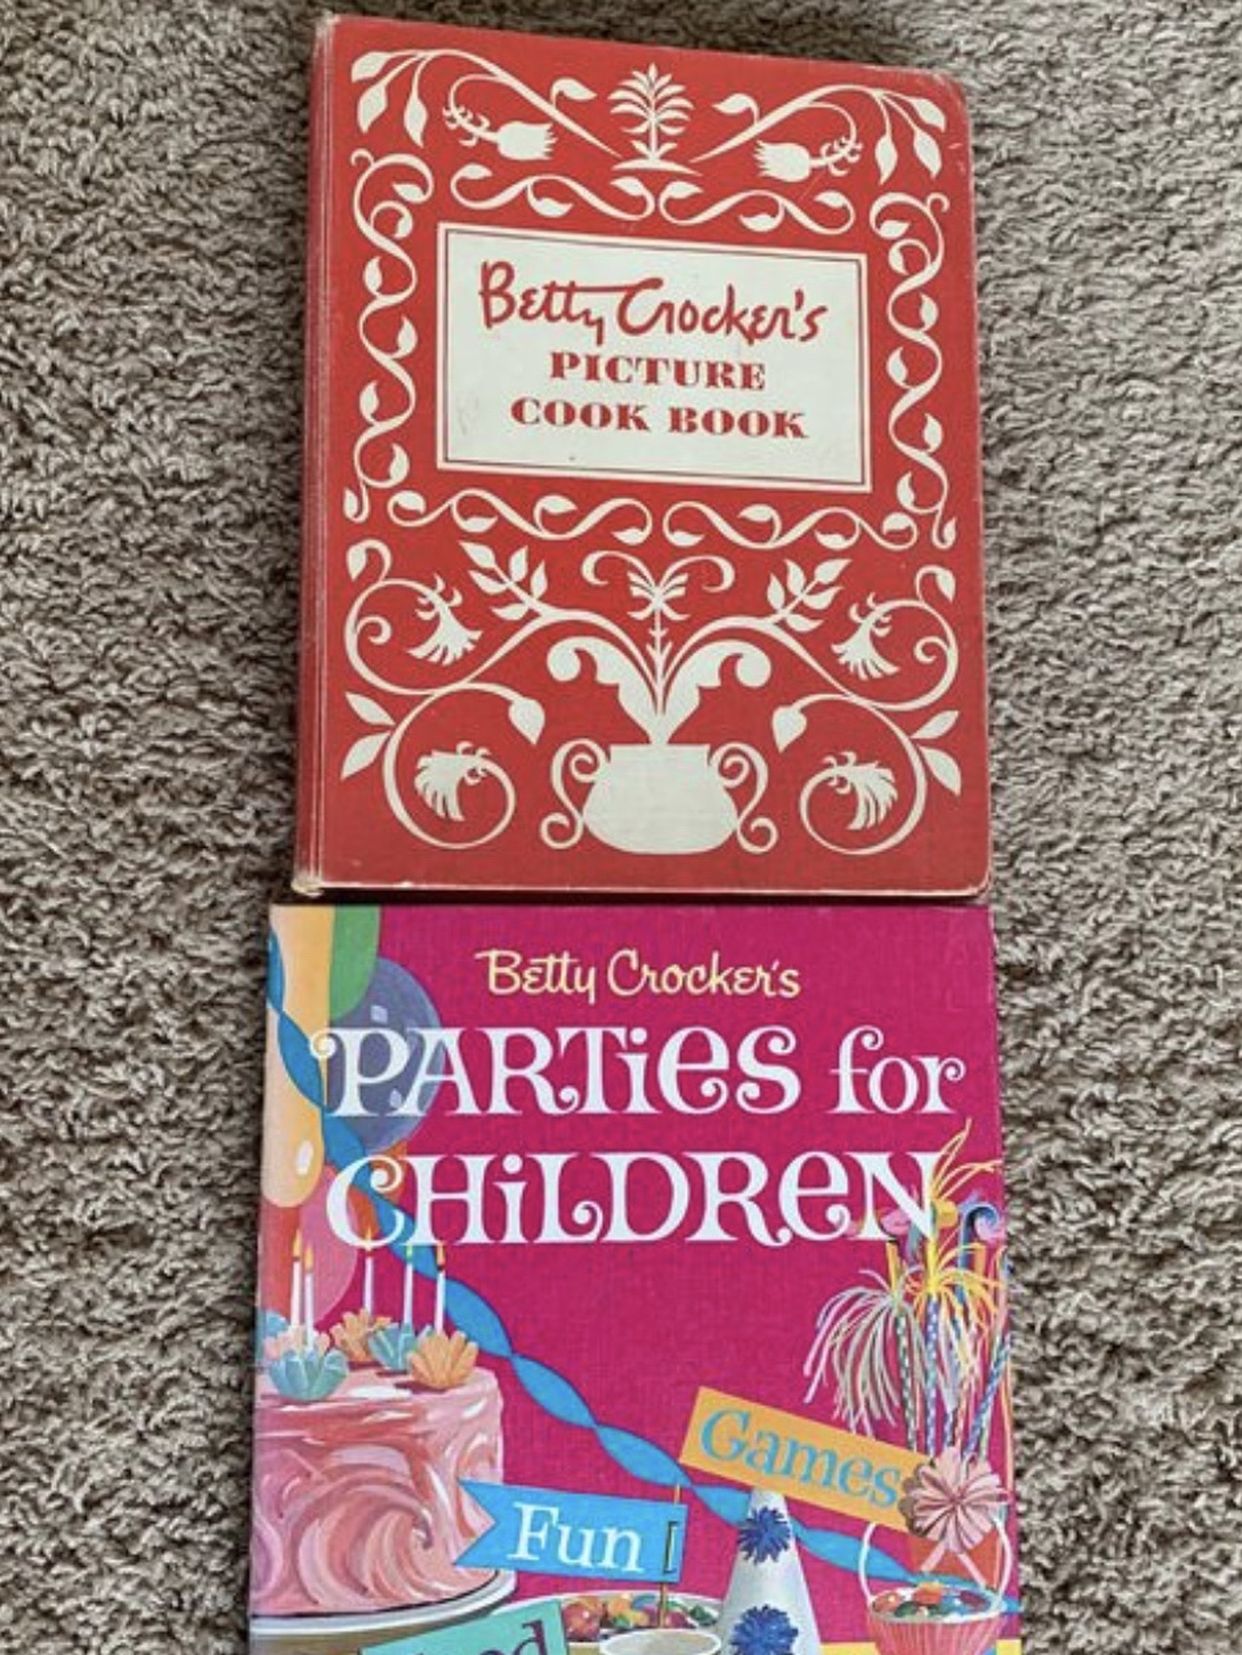 VINTAGE BETTY CROCKER COOKBOOKS. 1950’s FIRST EDITION. PICTURE COOKBOOK AND PARTIES FOR CHILDREN. SEE PHOTOS